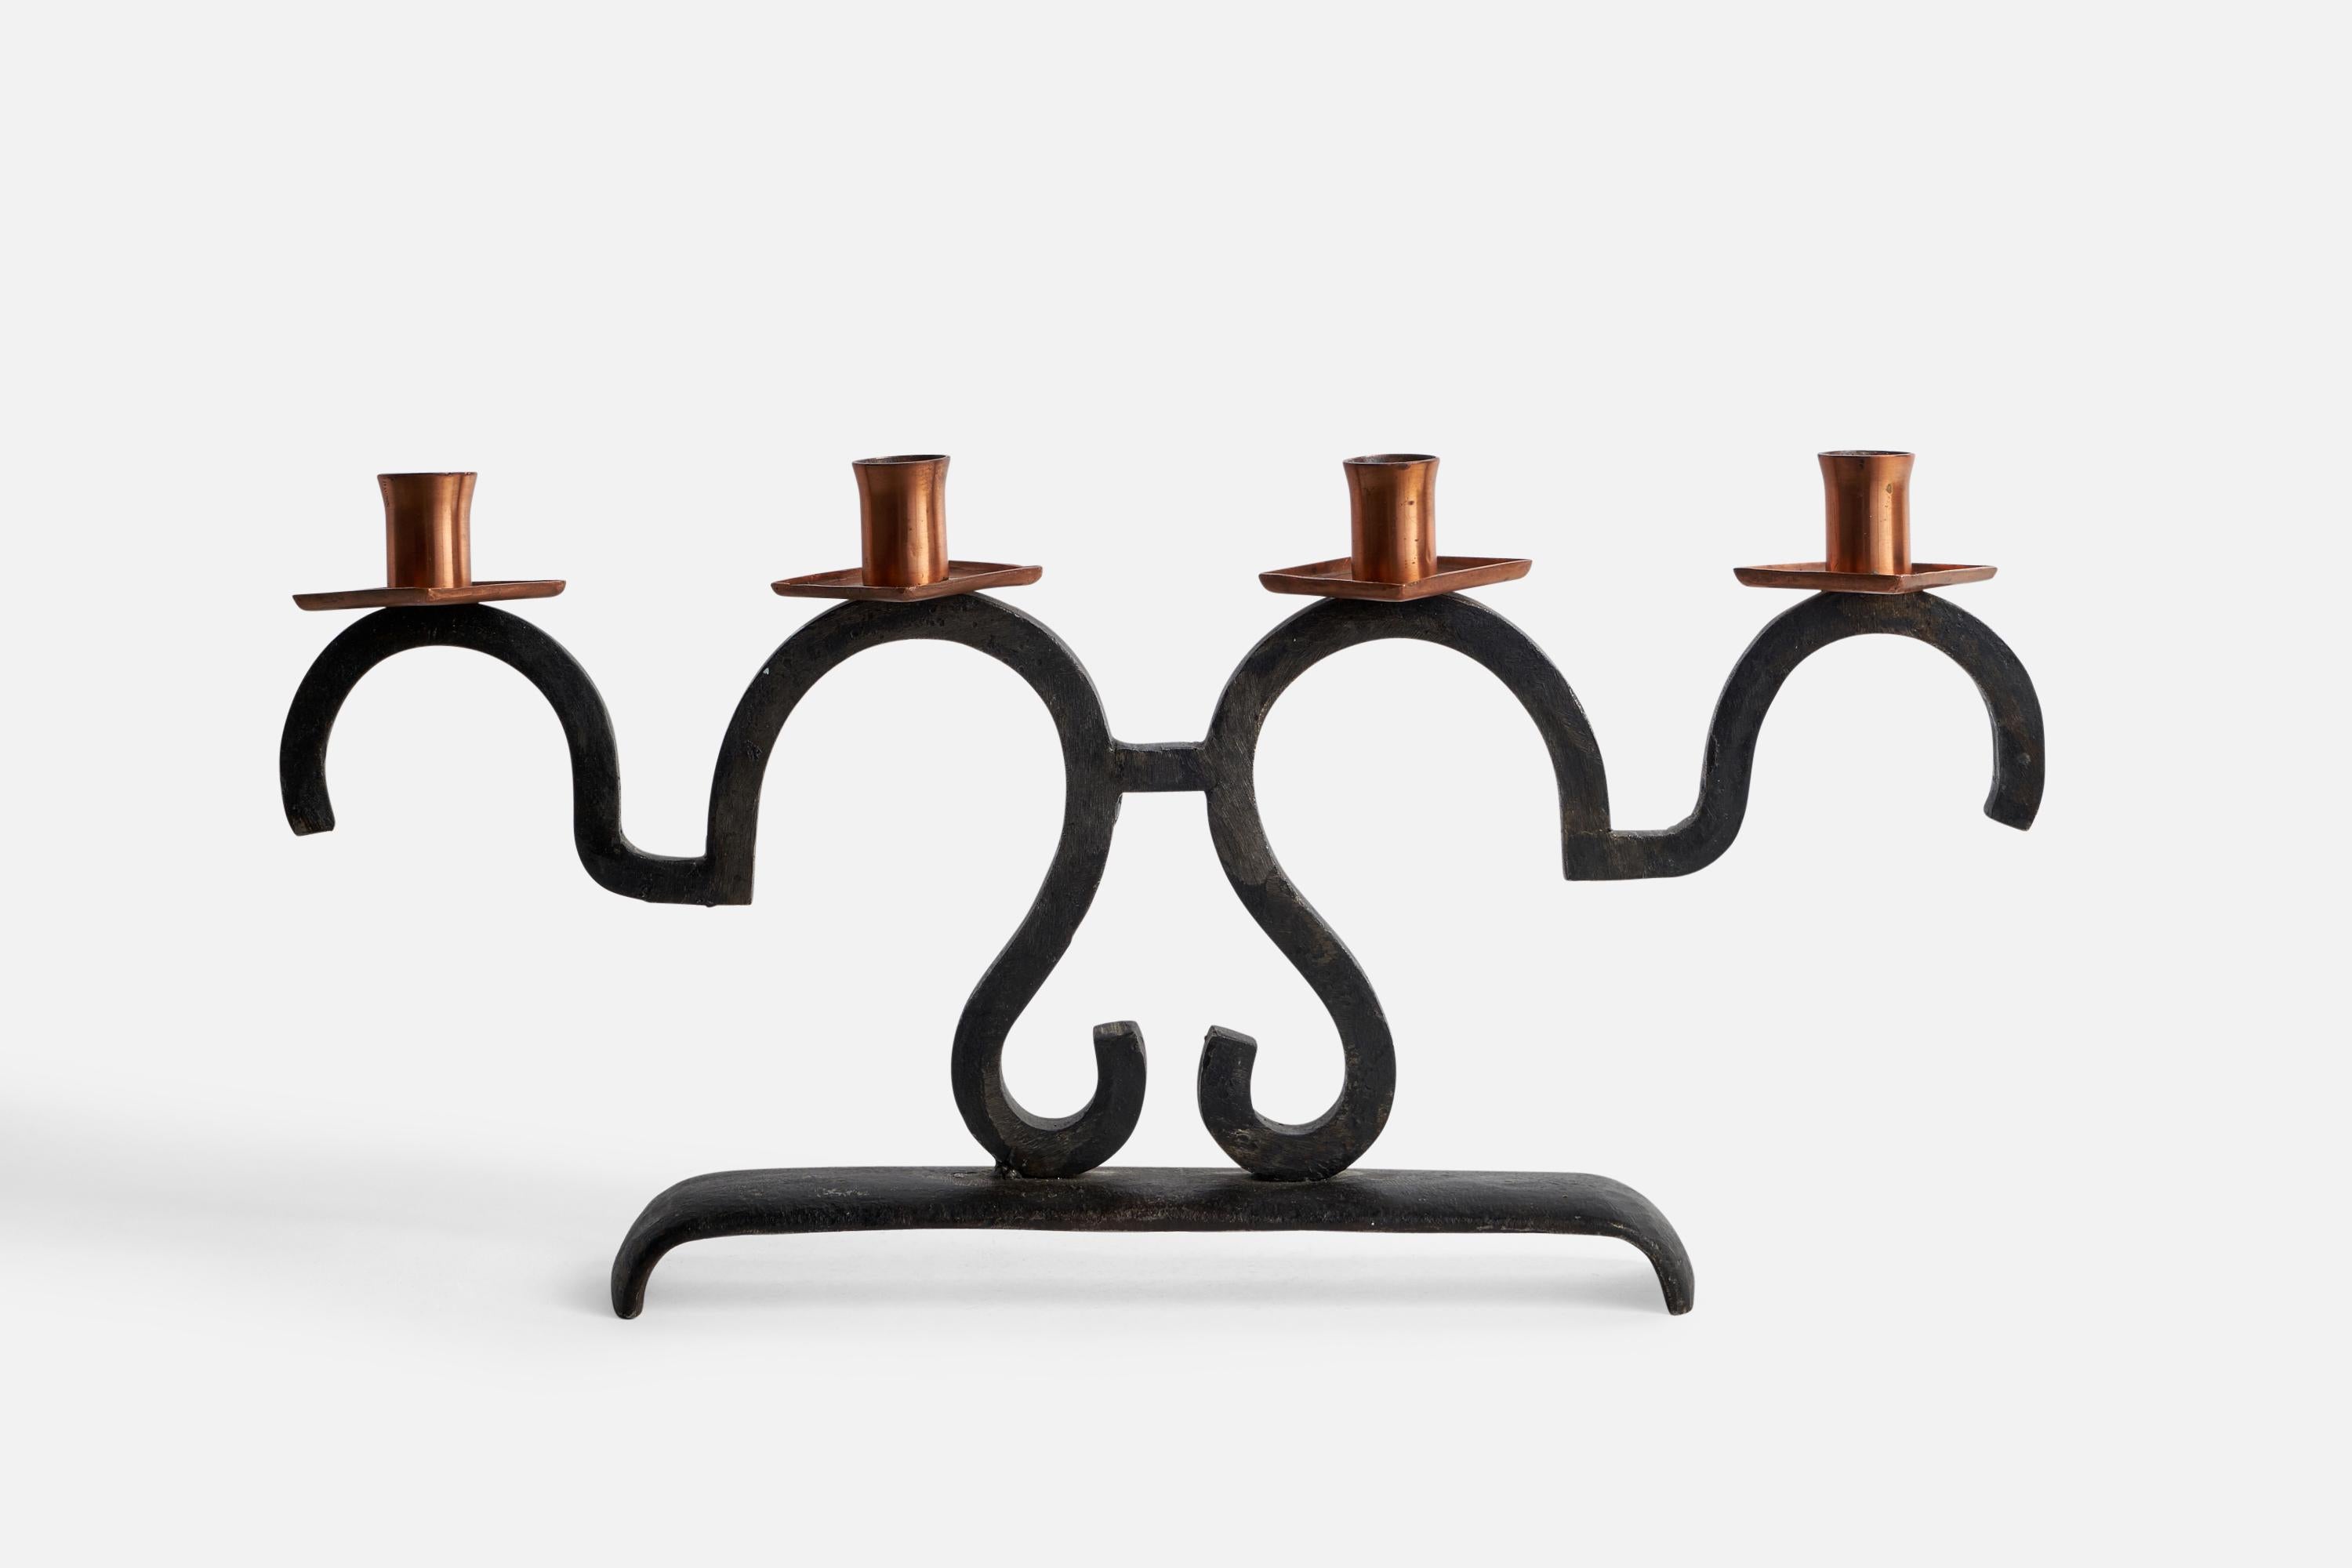 A black-painted cast iron and copper candelabra, designed and produced in Sweden, c. 1940s.

Holds 0.8” diameter candles